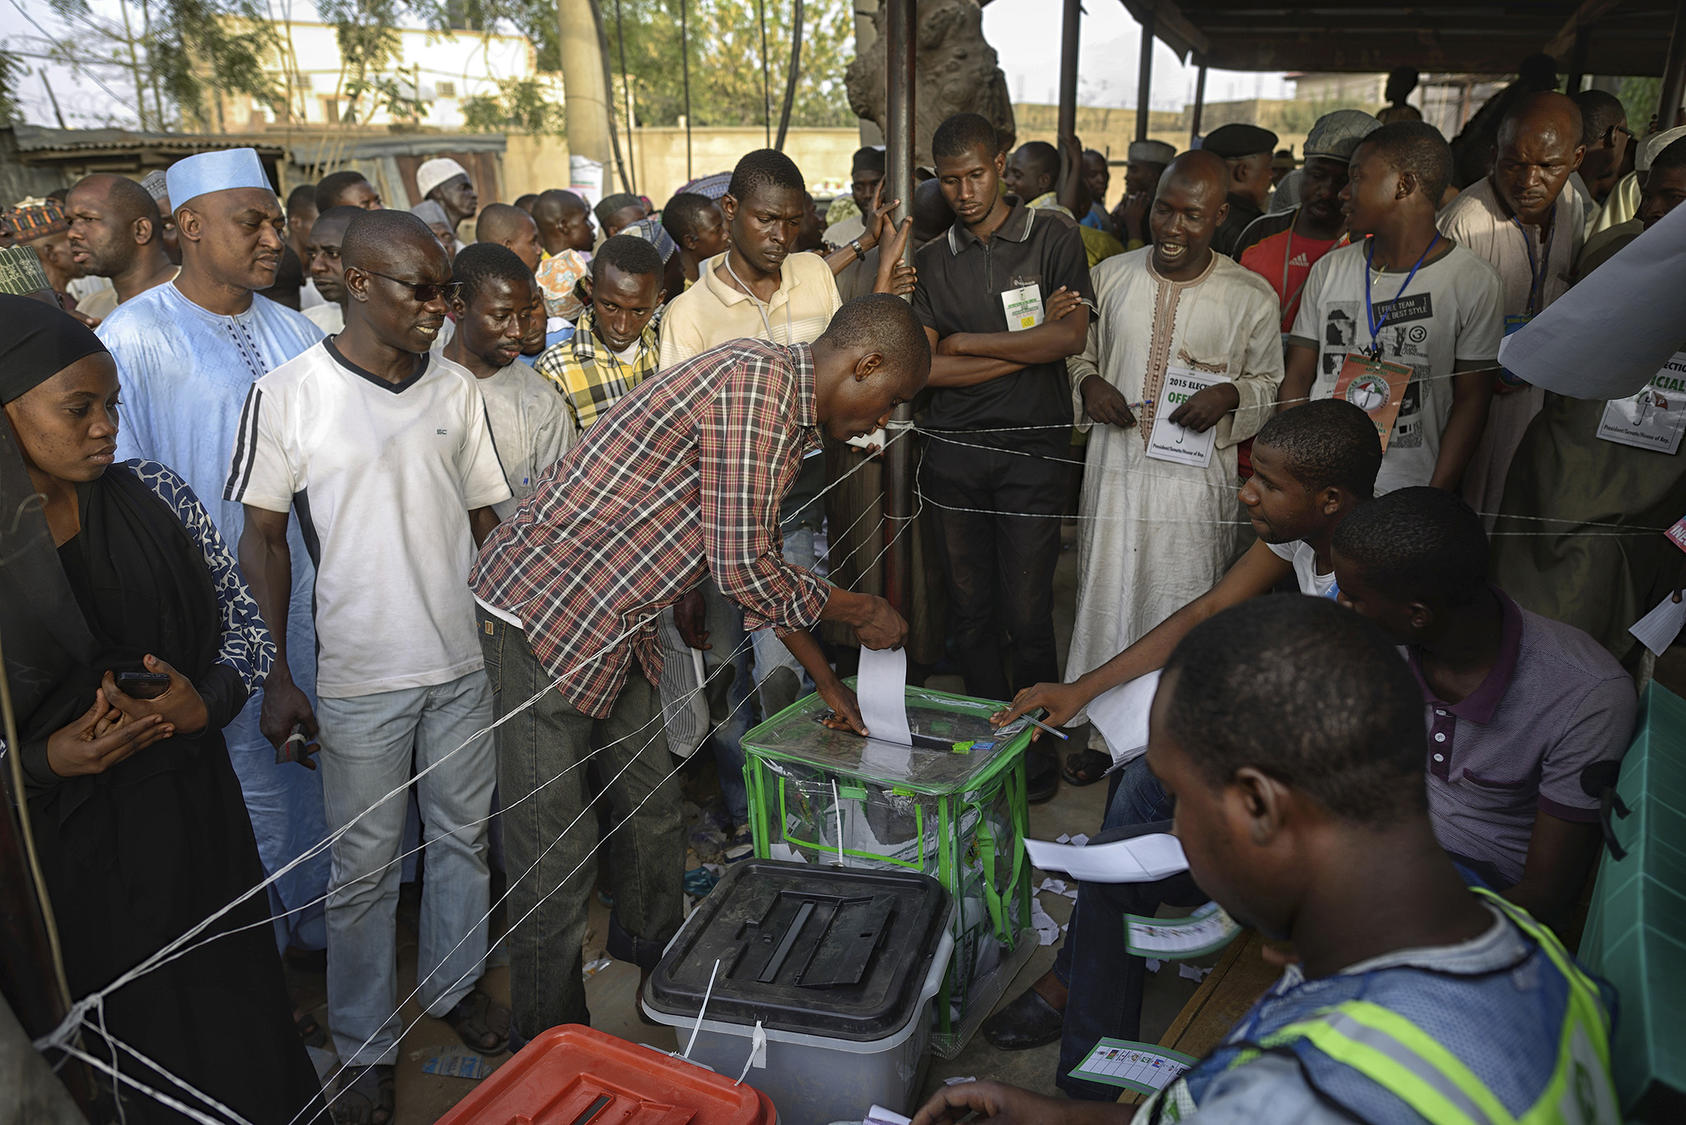 A man casts his ballot at a polling station in Kano, Nigeria, March 28, 2015. (Samuel Aranda/The New York Times)